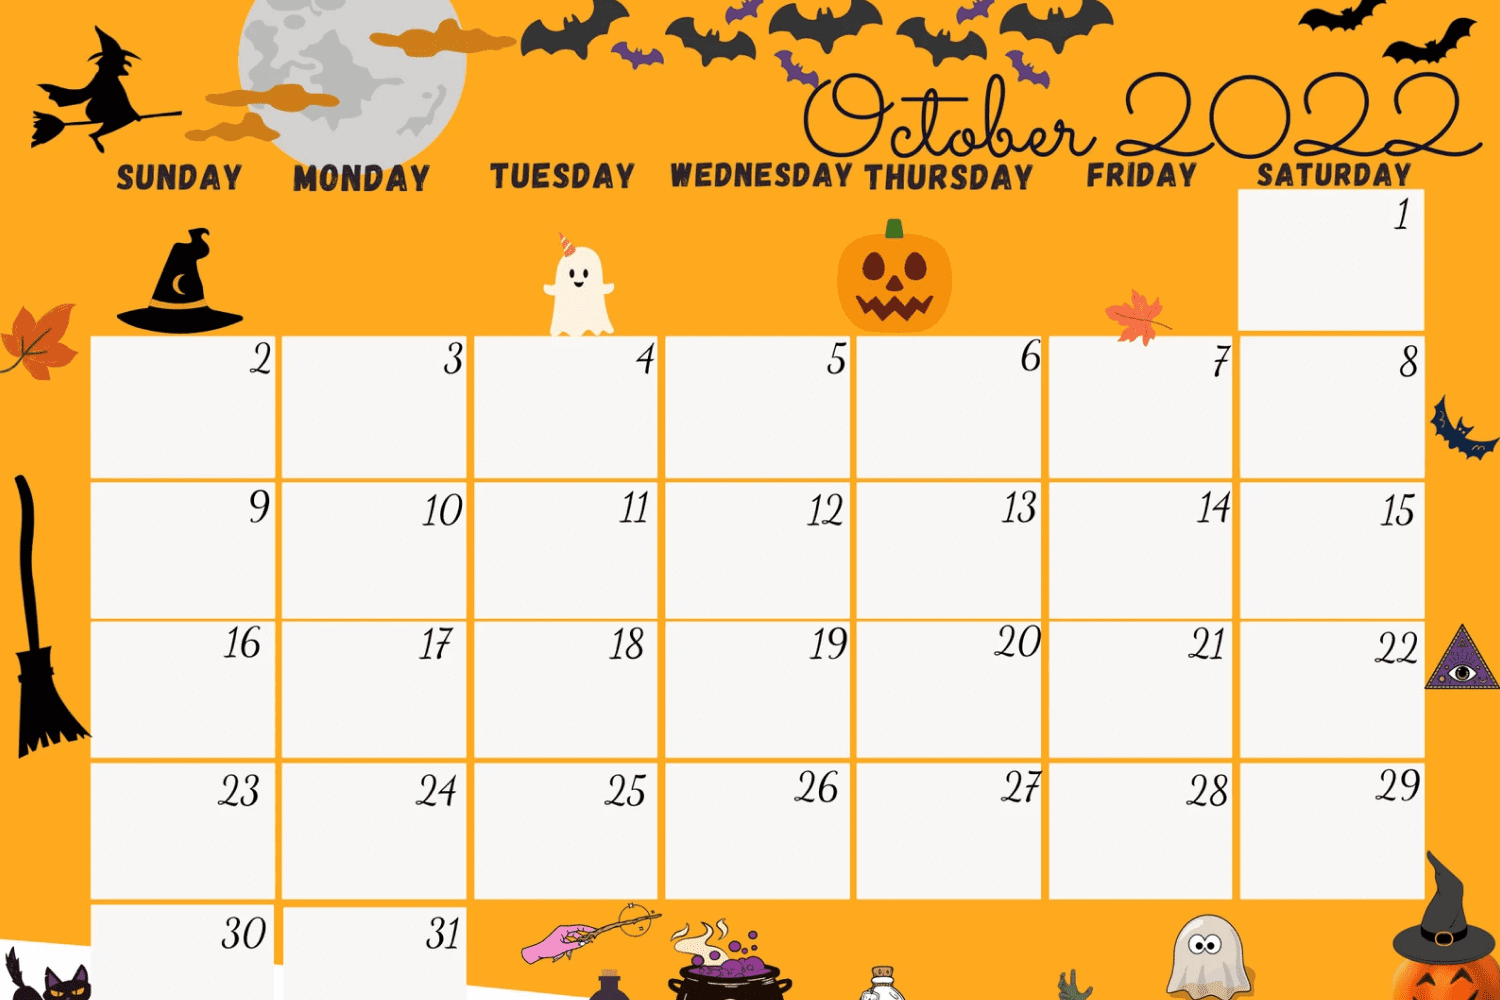 Bright yellow calendar for October with pumpkins, ghosts, witches.